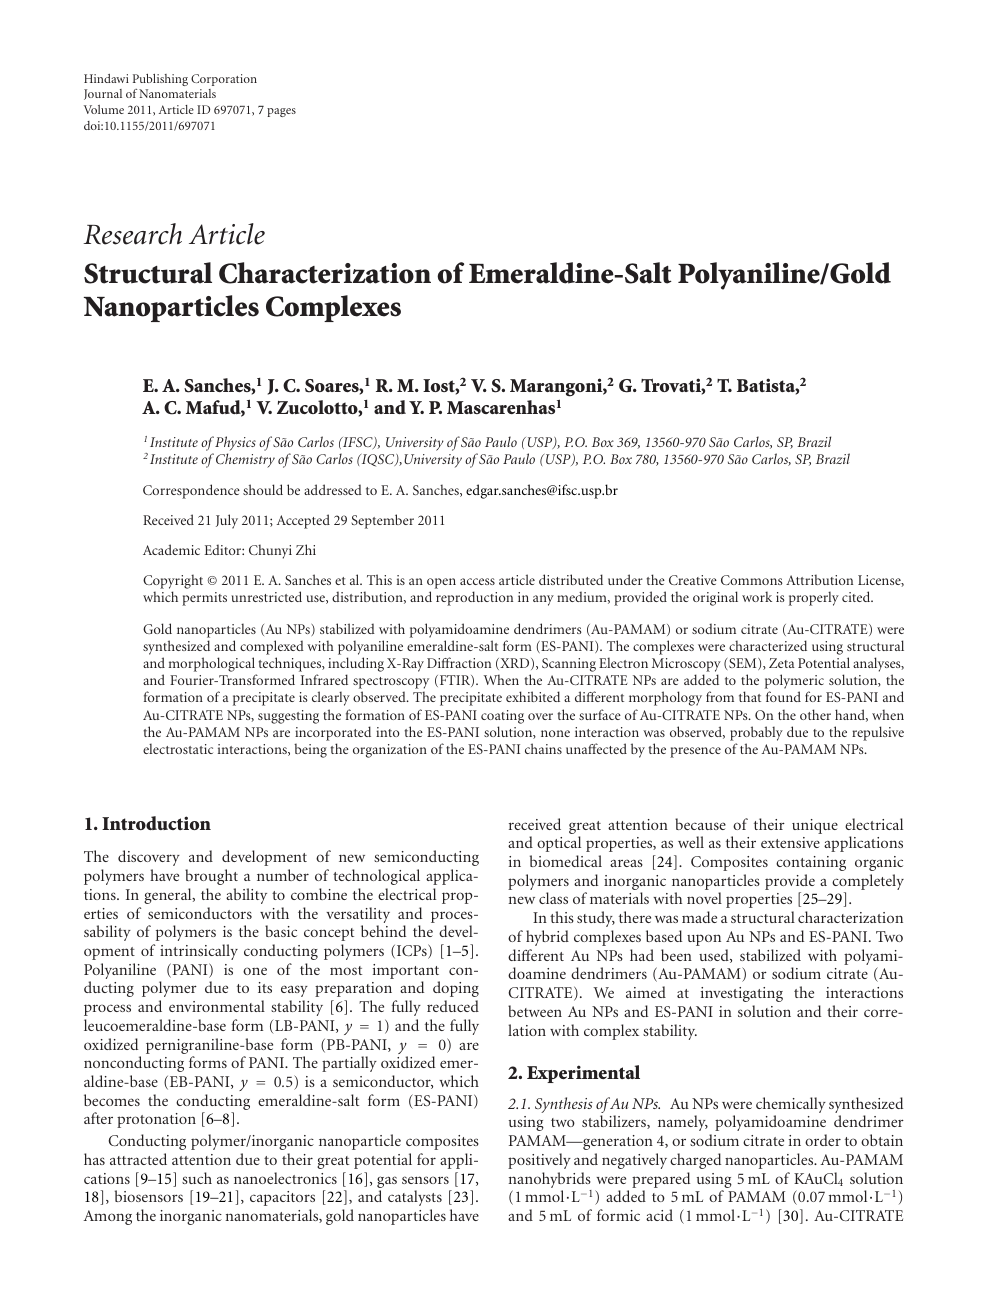 Structural Characterization Of Emeraldine Salt Polyaniline Gold Nanoparticles Complexes Topic Of Research Paper In Nano Technology Download Scholarly Article Pdf And Read For Free On Cyberleninka Open Science Hub